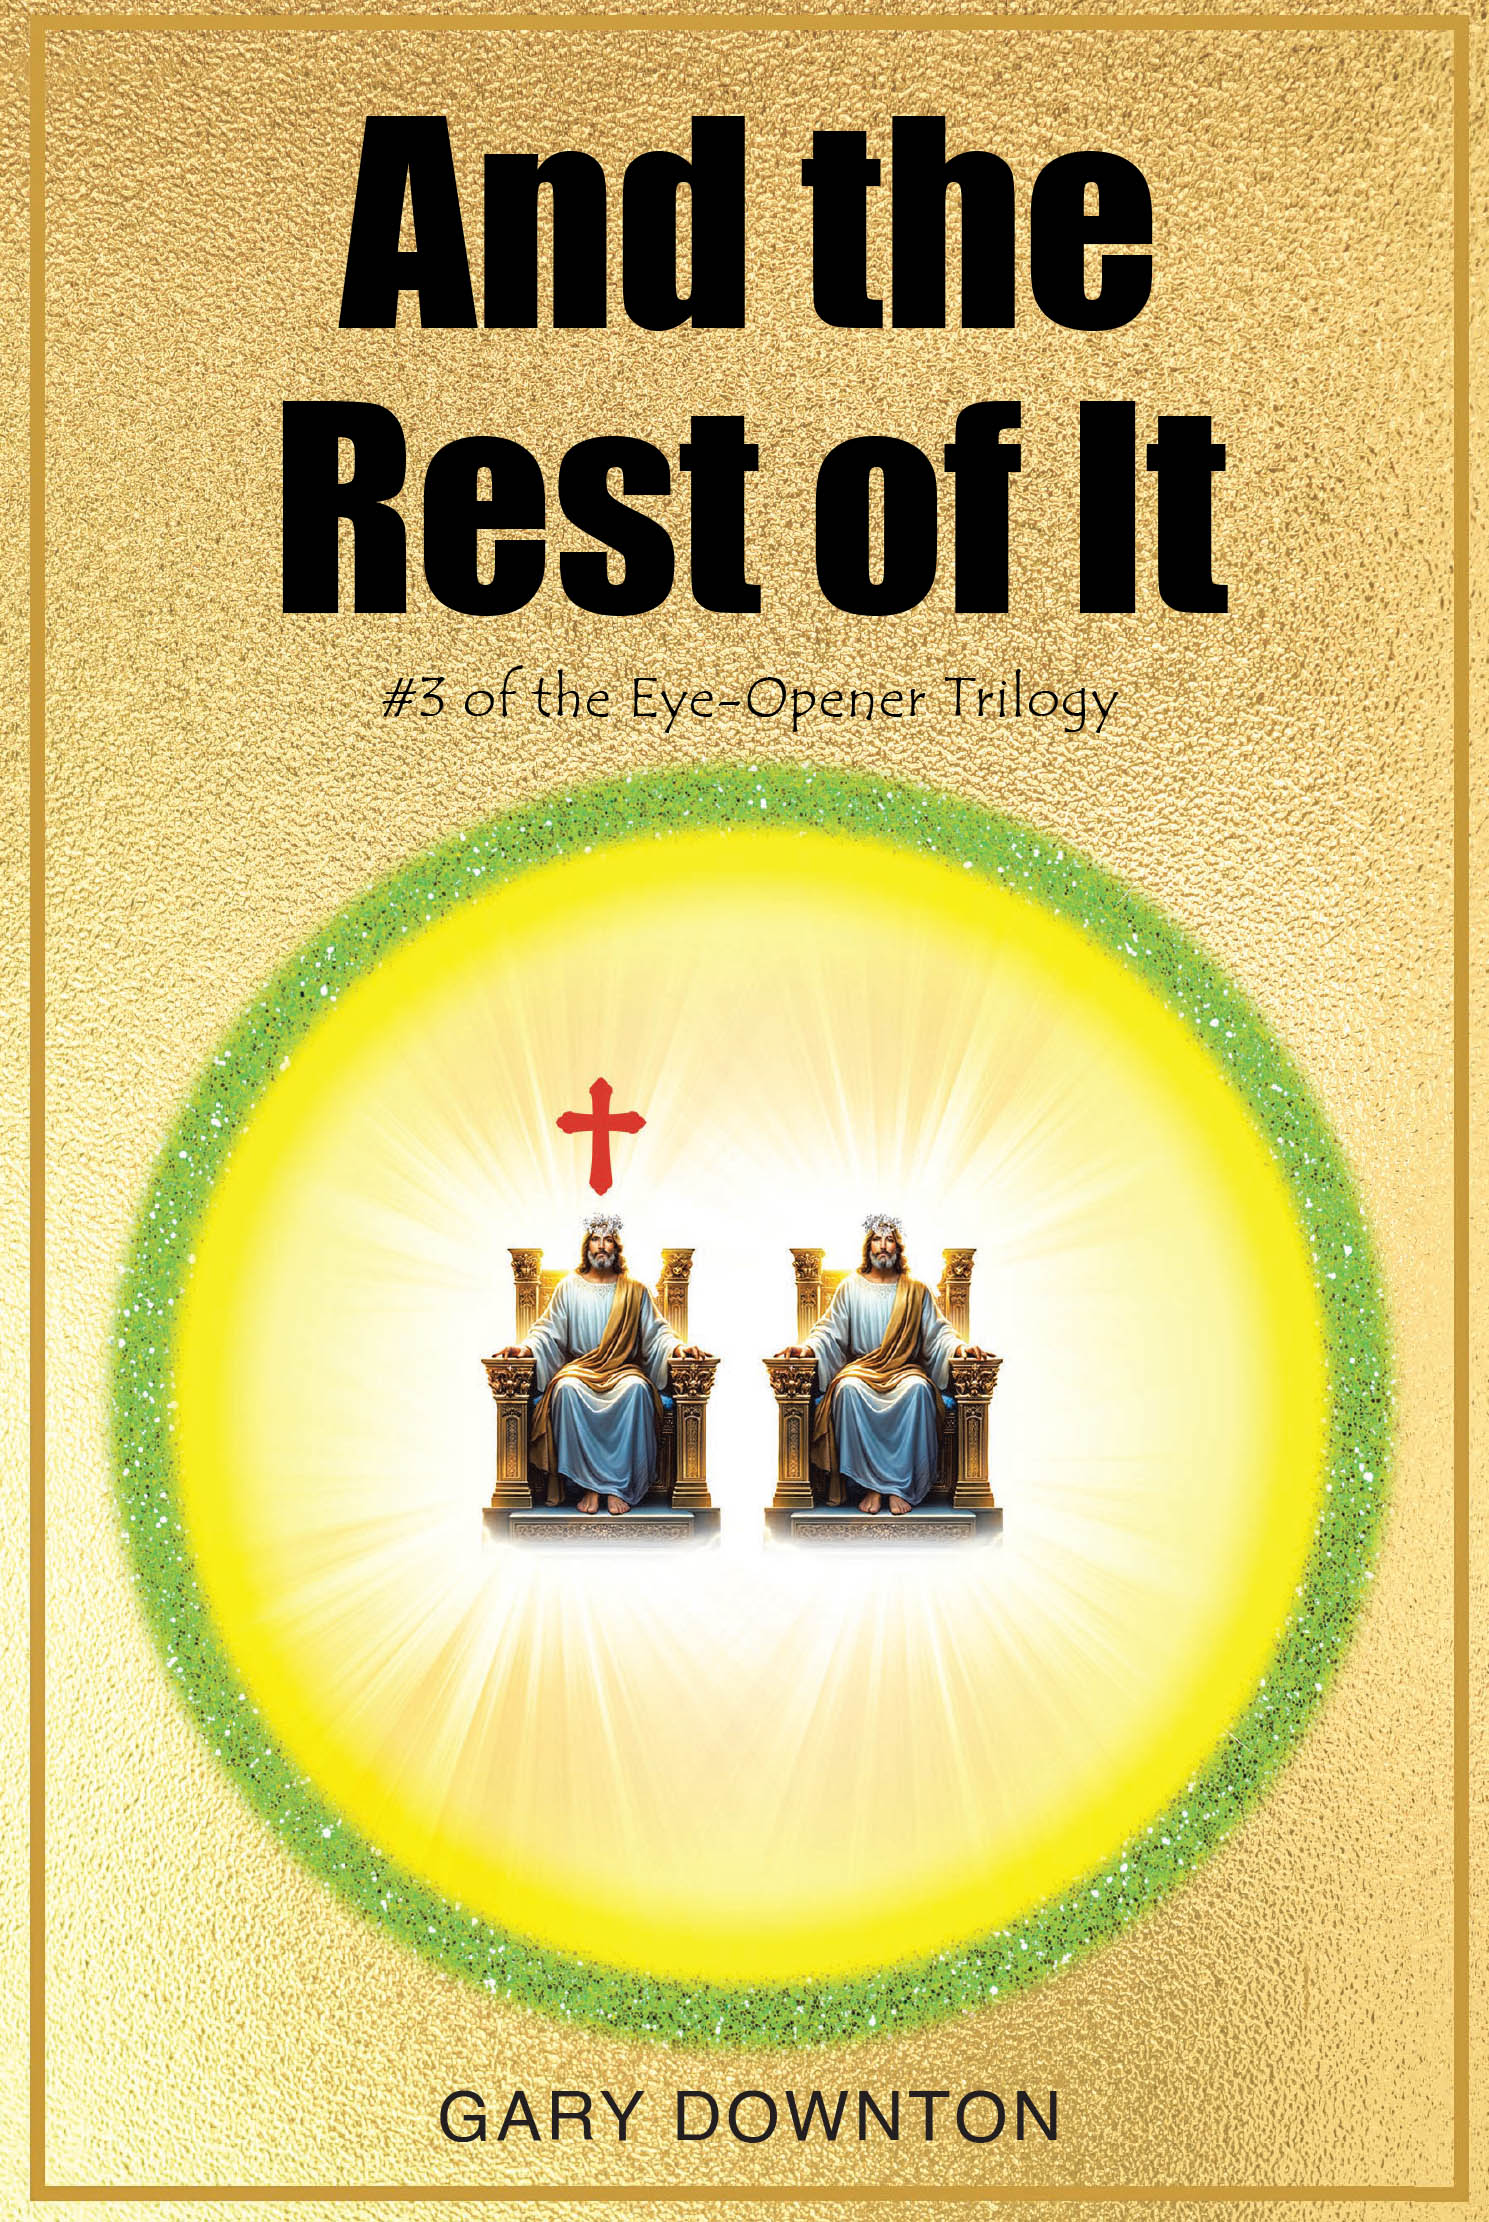 Gary Downton’s Newly Released “And the Rest of It #3 of the Eye-Opener Trilogy” is a Compelling Prophetic Exploration